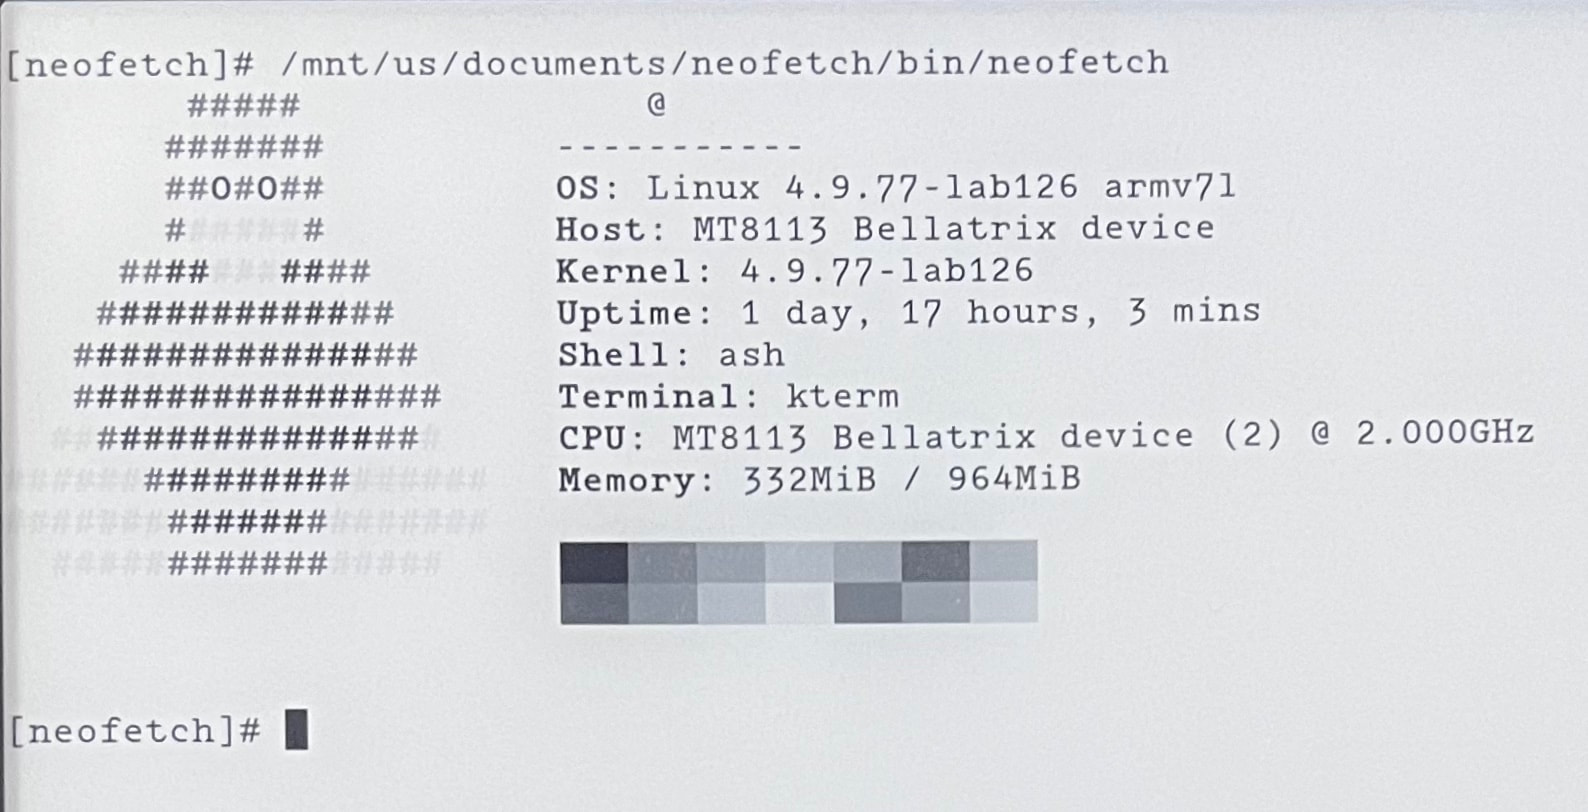 Neofetch image displaying Kindle Scribe specifications